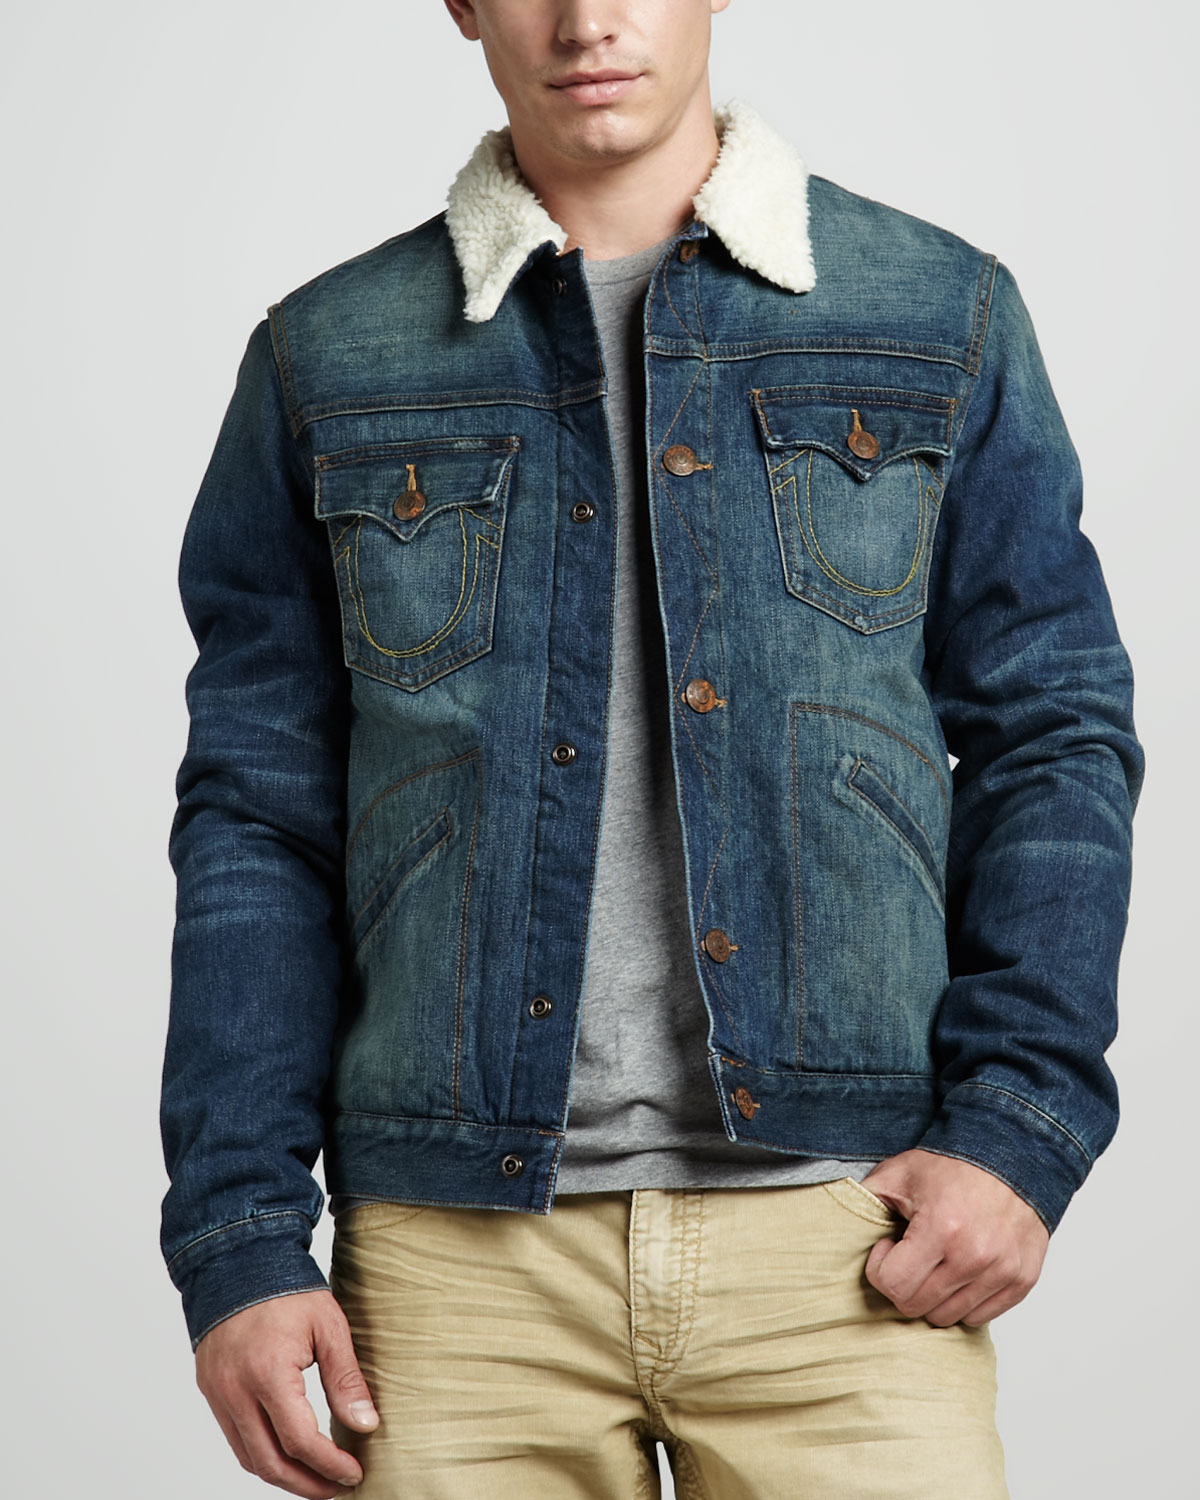 Lyst - True religion Daltry Denim Jacket with Sherpa Collar in Blue for Men